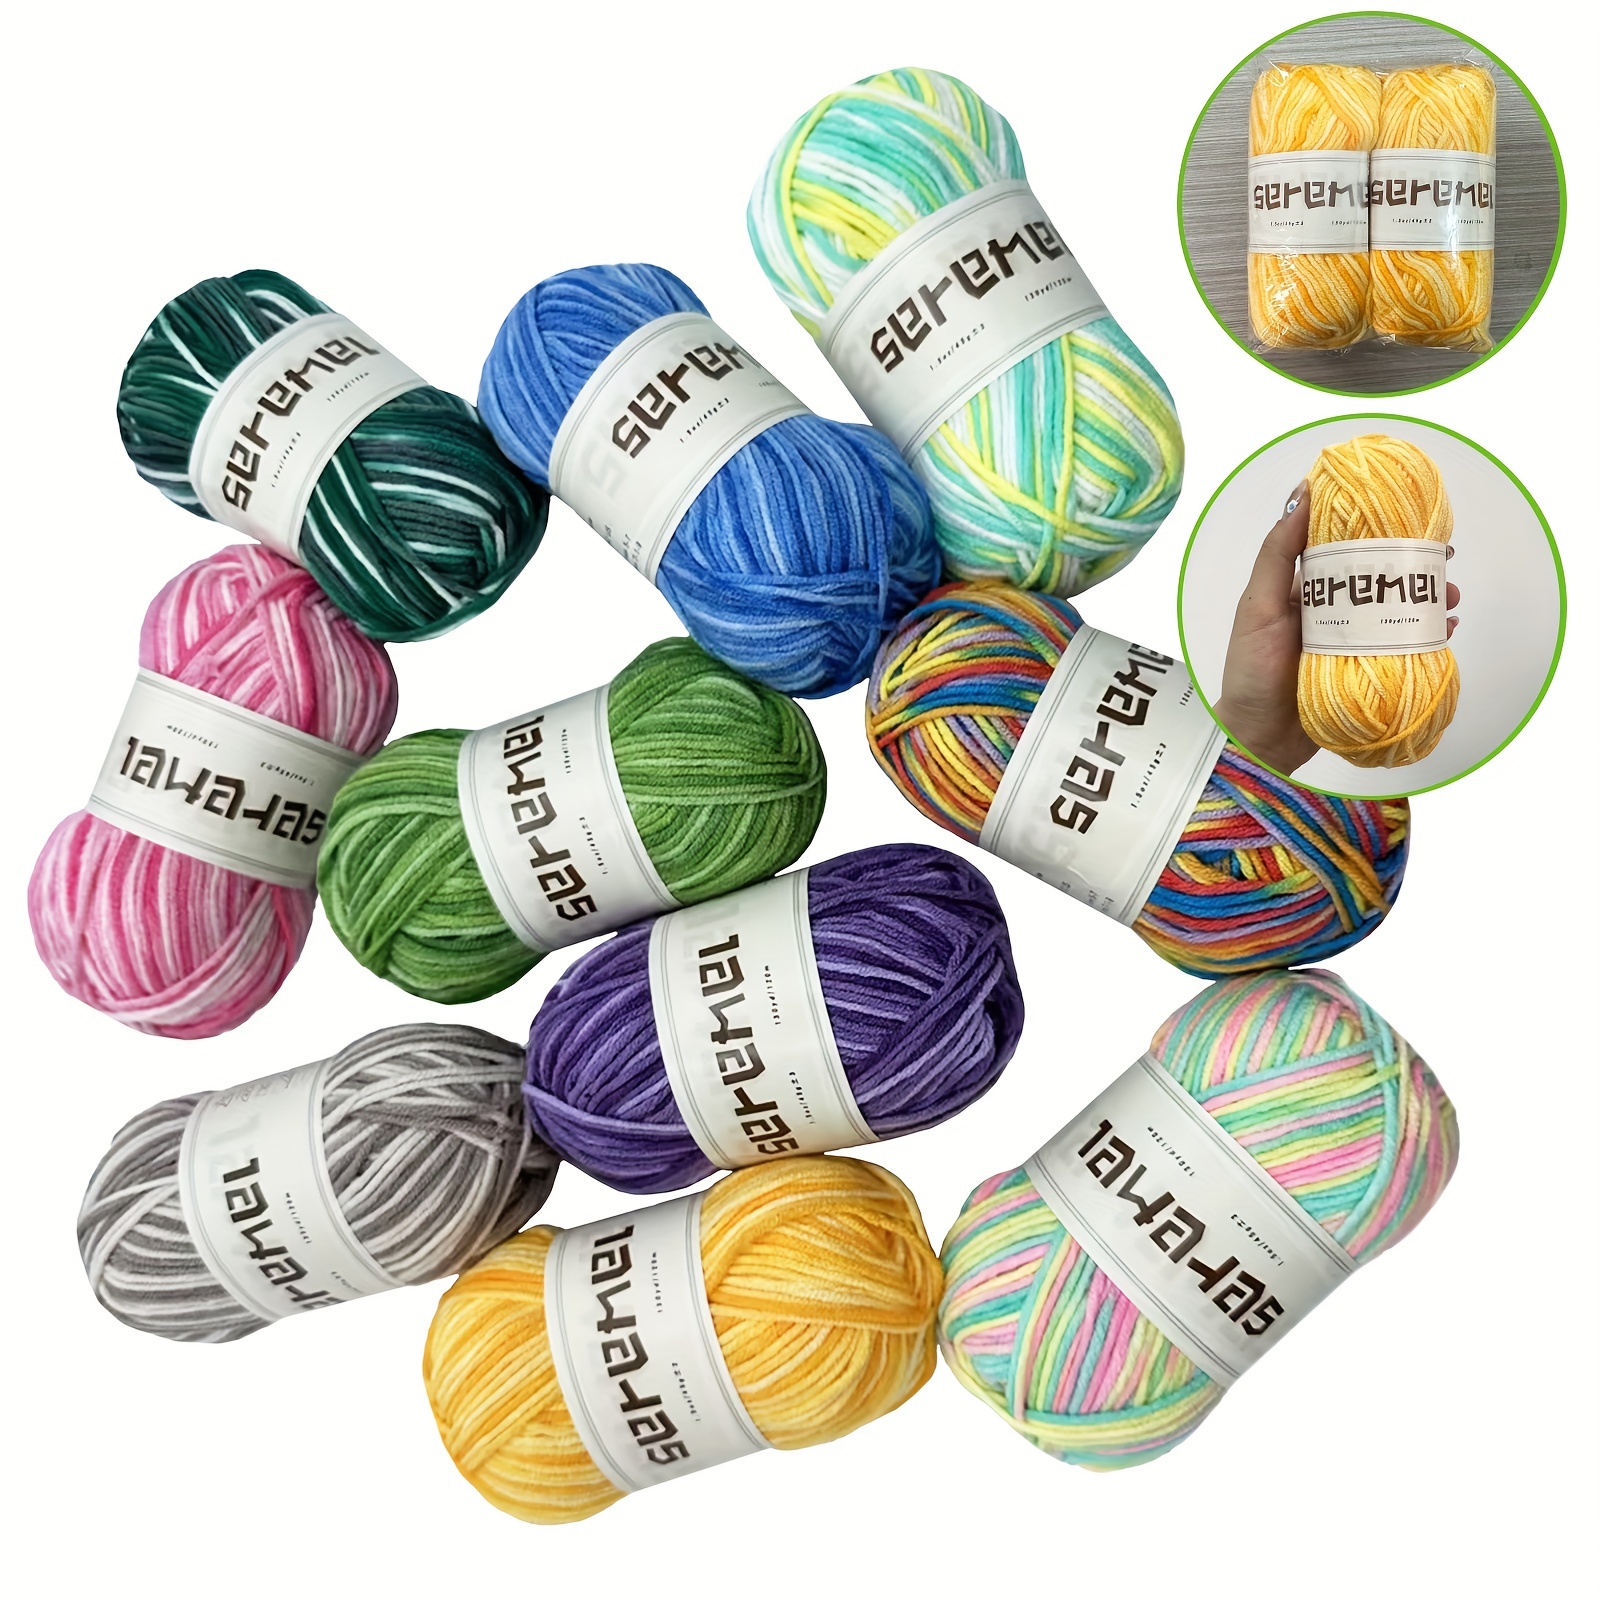 12 ounces, Small balls of acrylic yarn, lot of yarn, worsted weight,  multi-color